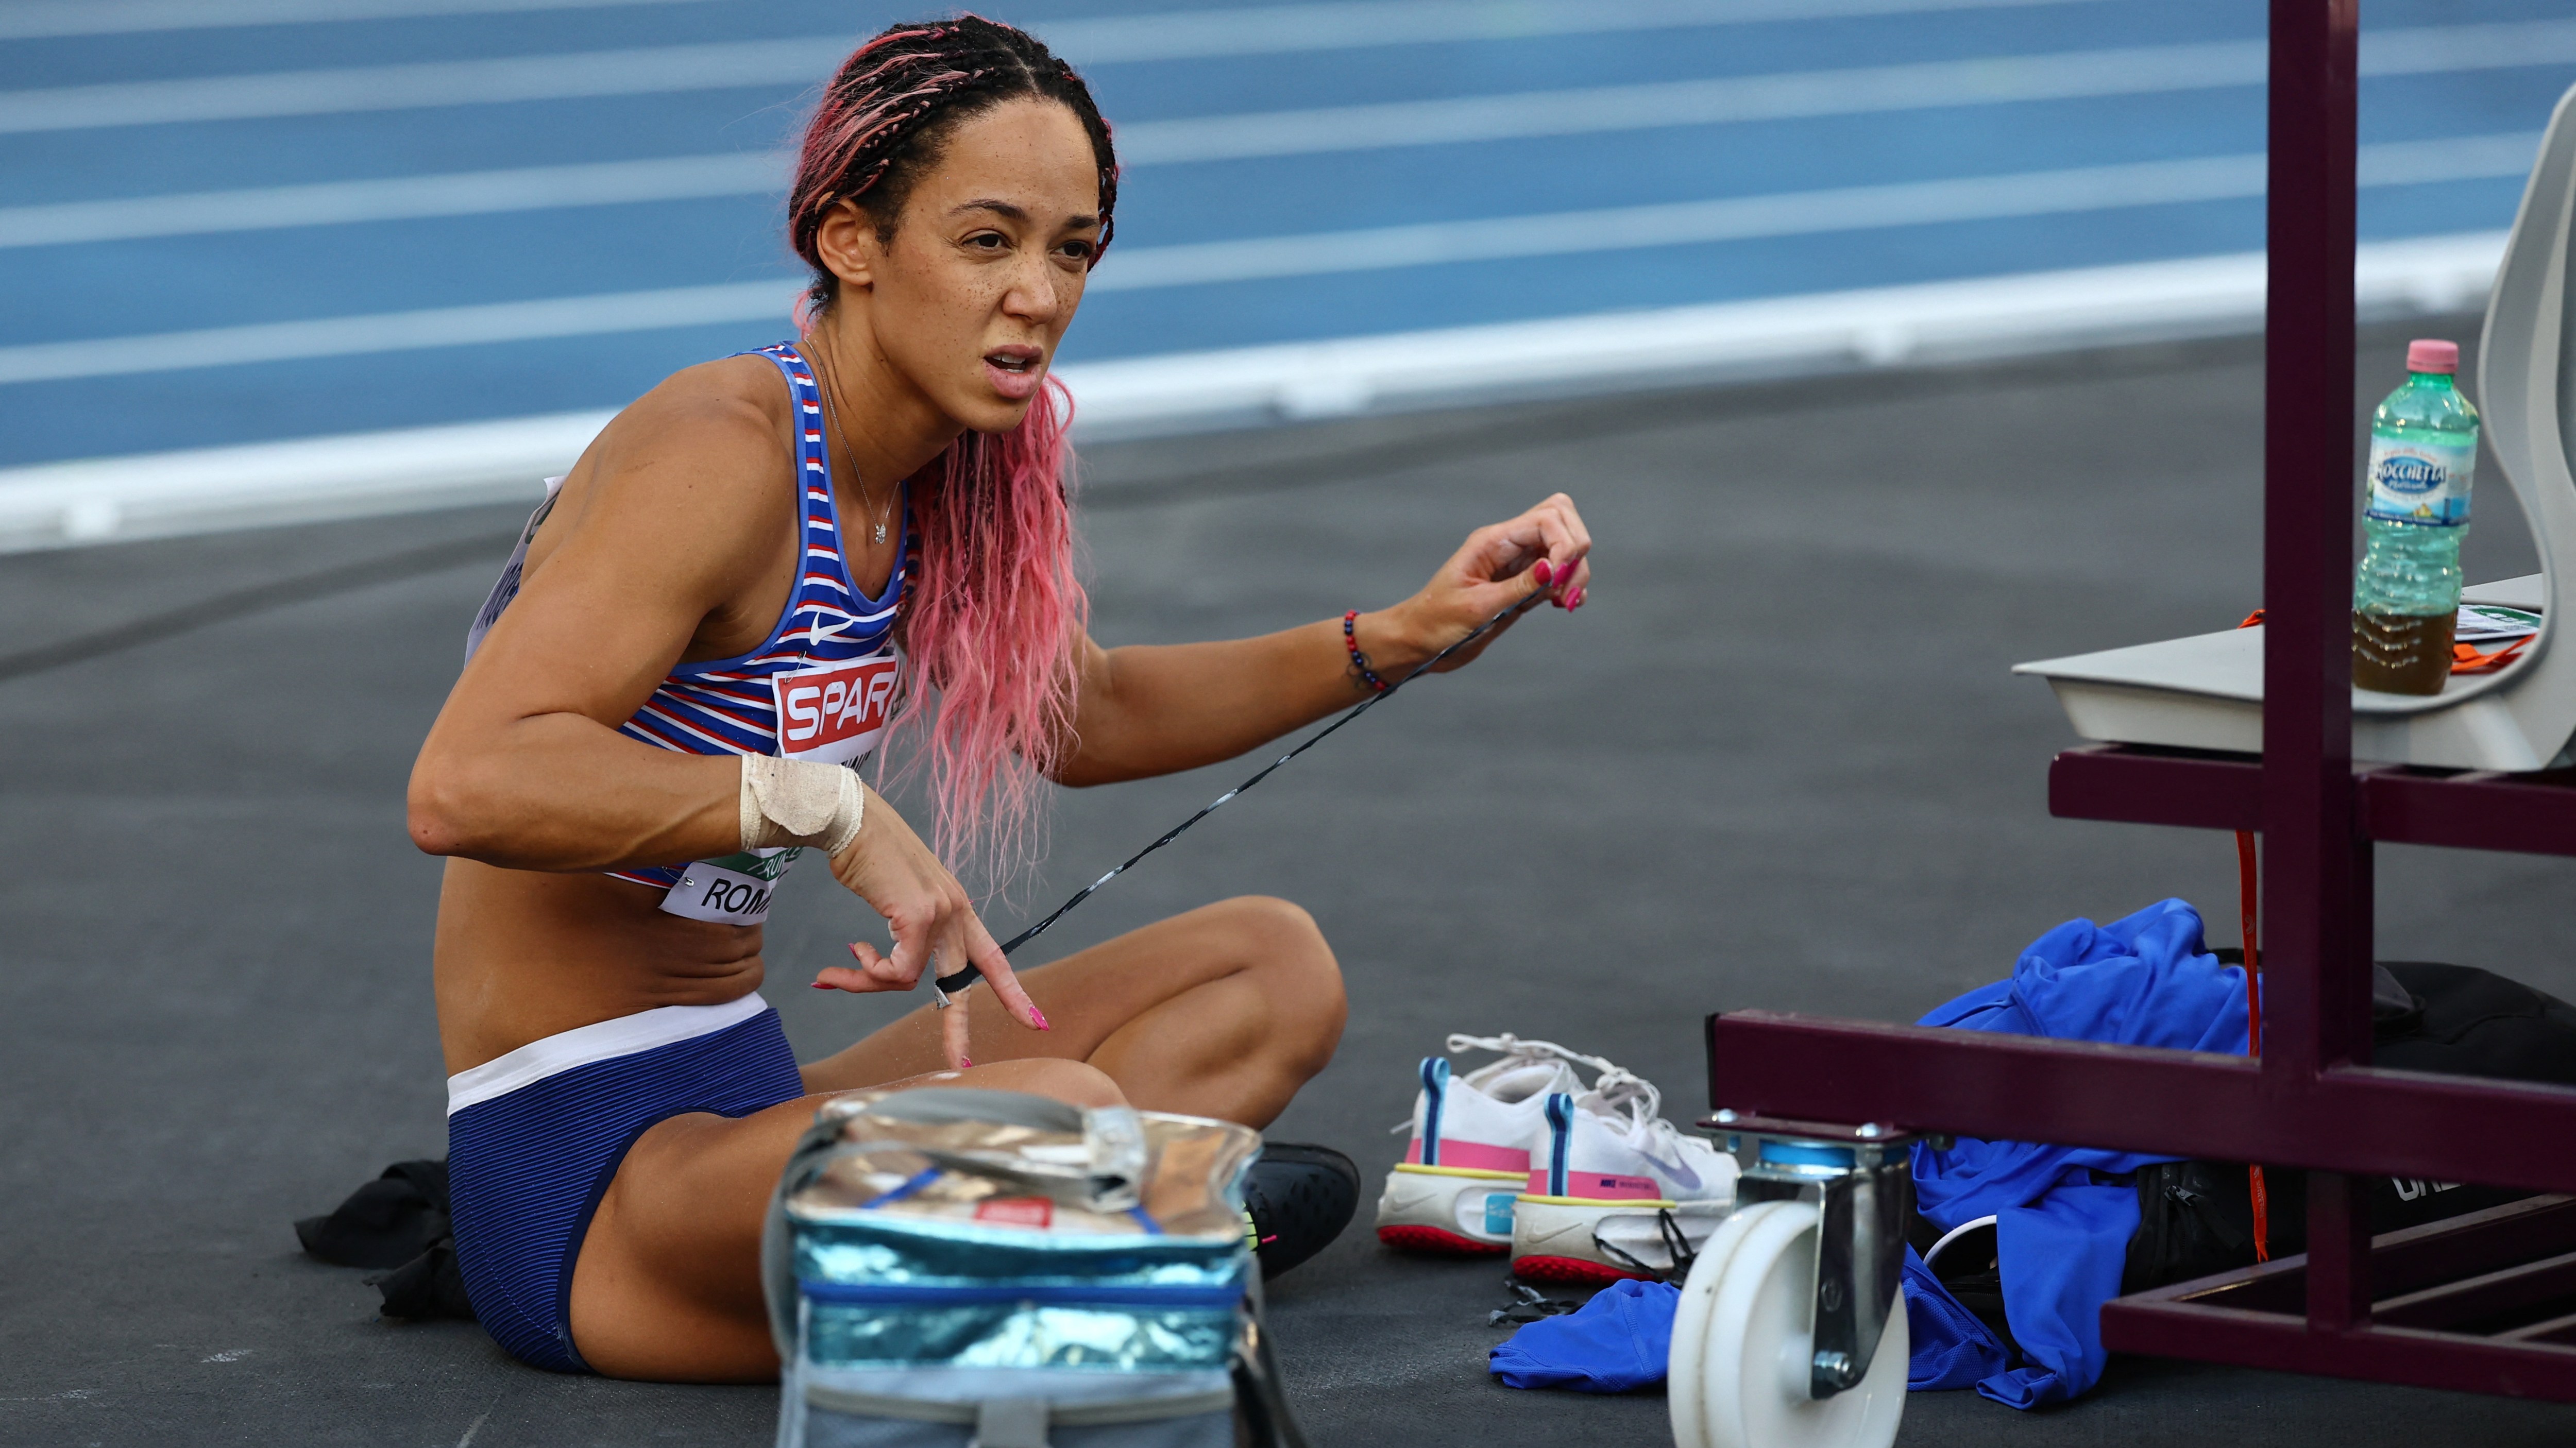 Johnson-Thompson was down in ninth when the news came that she was out